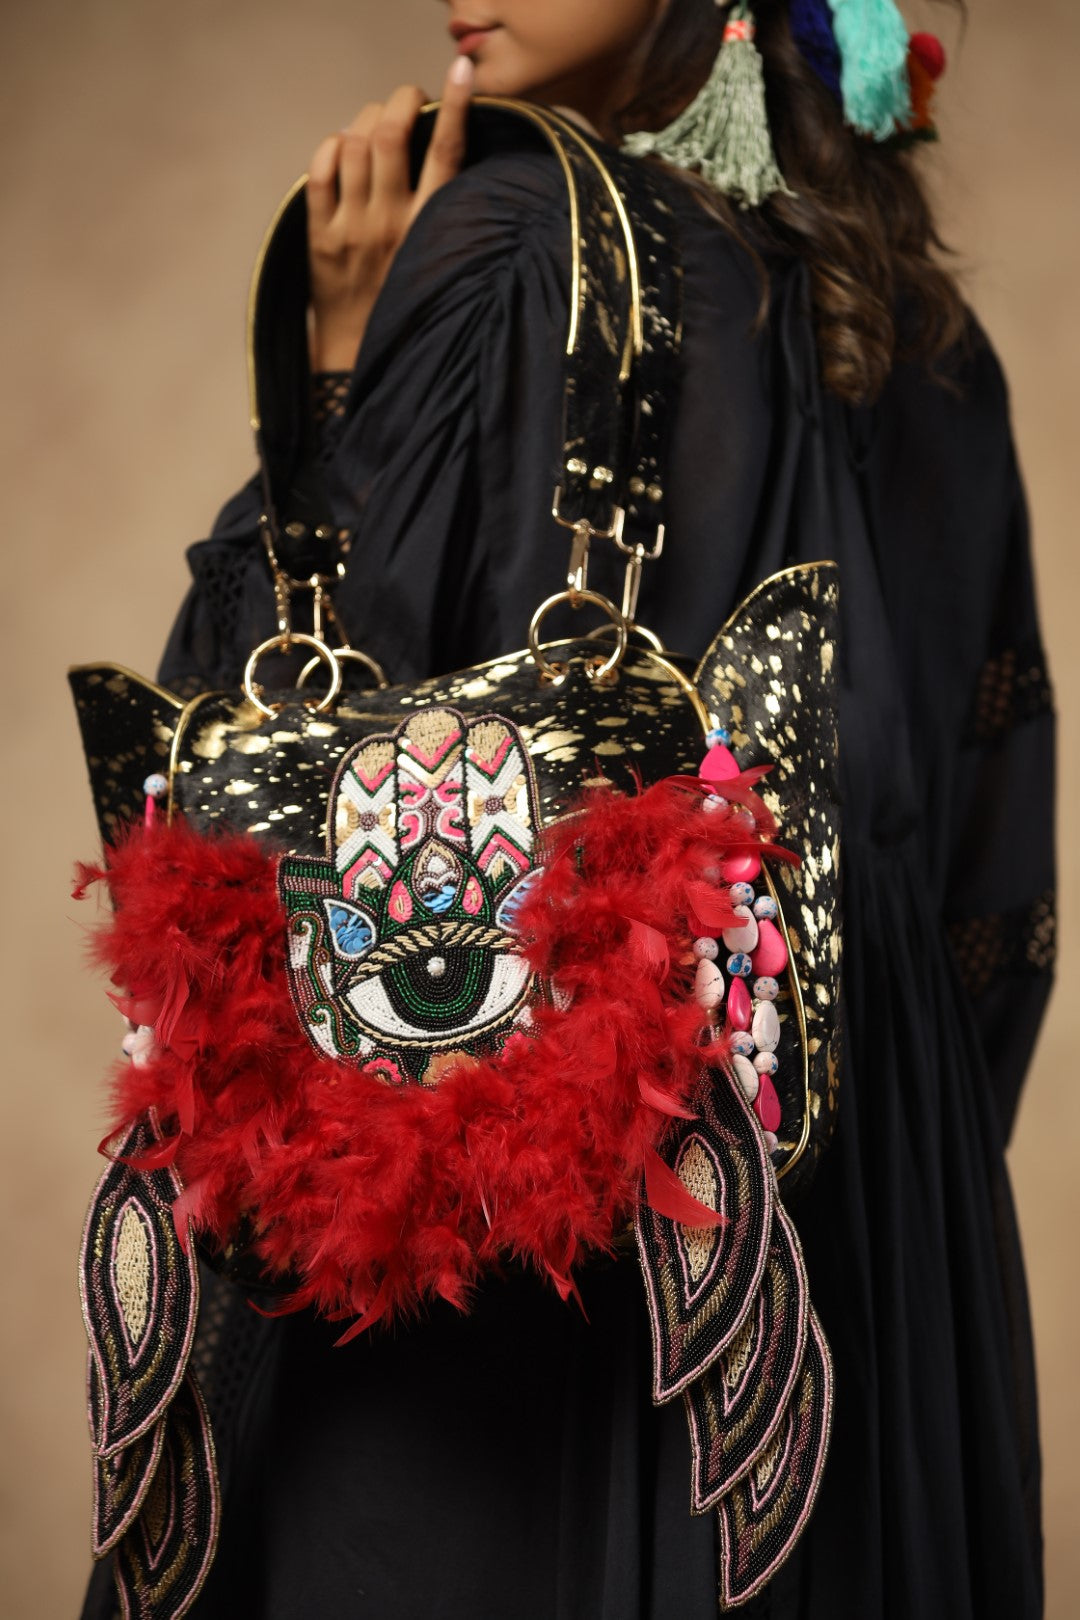 Women Handmade Leather Shoulder Bag With Red Feather Fringes